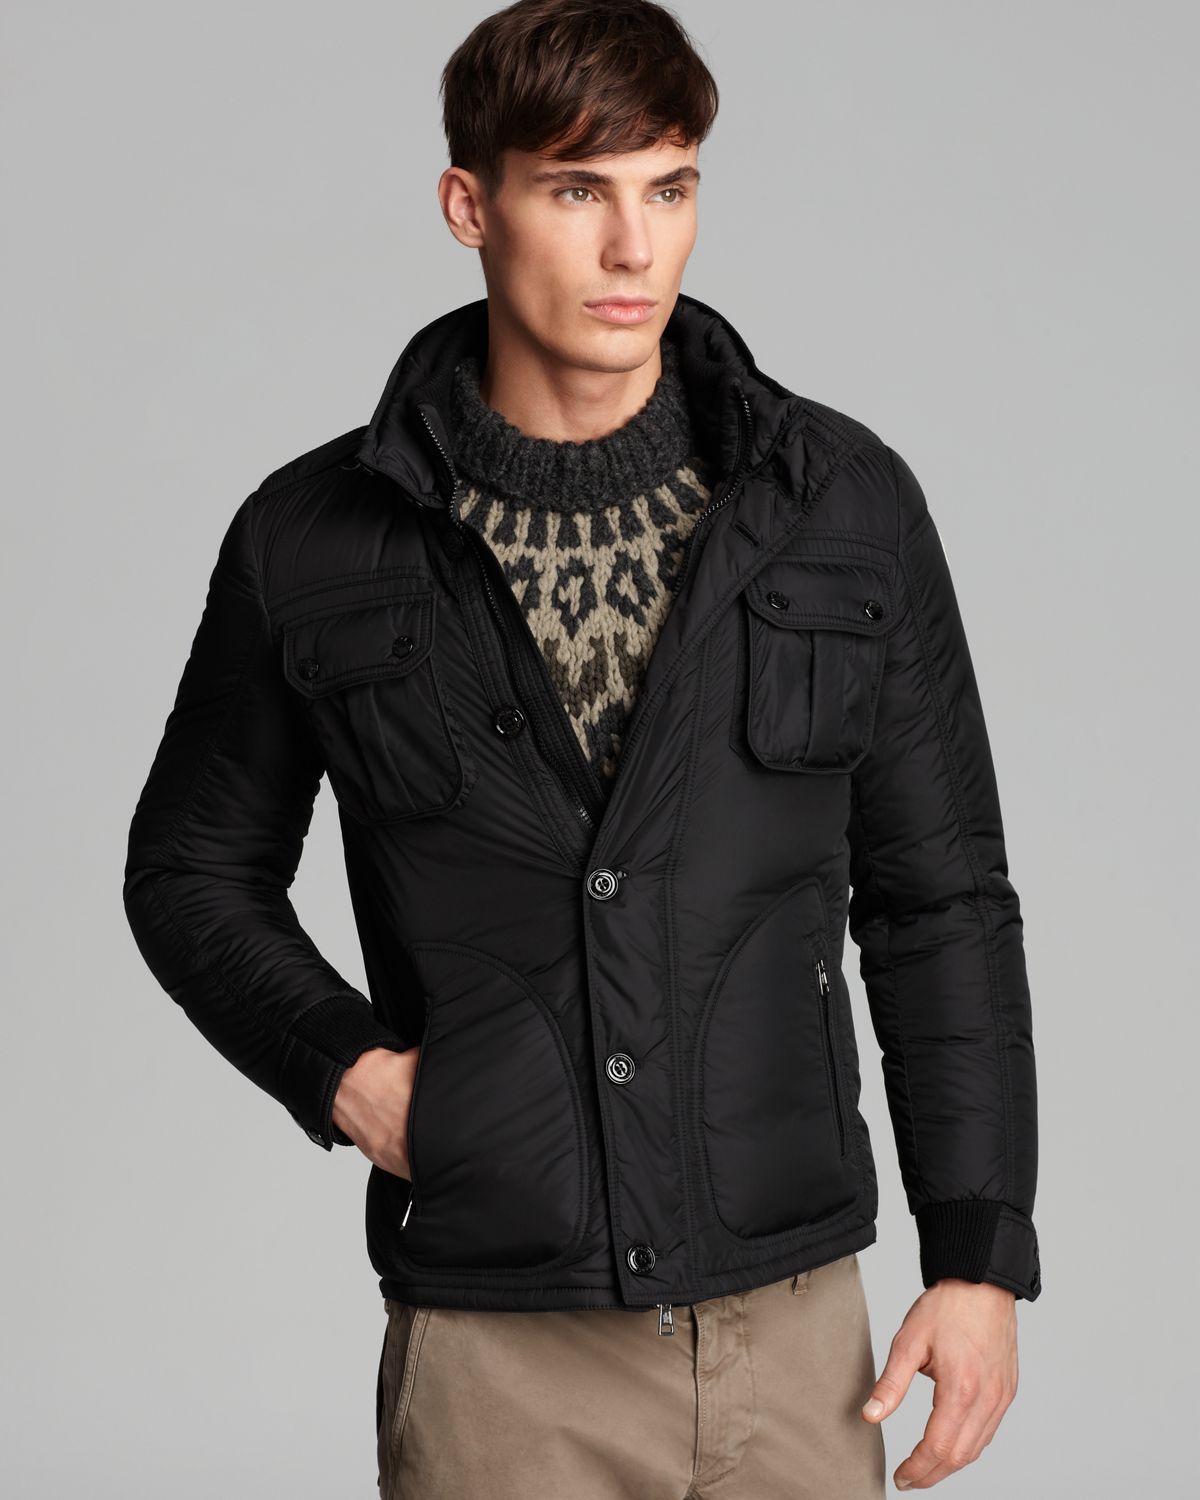 Moncler Tours Military Jacket in Black 